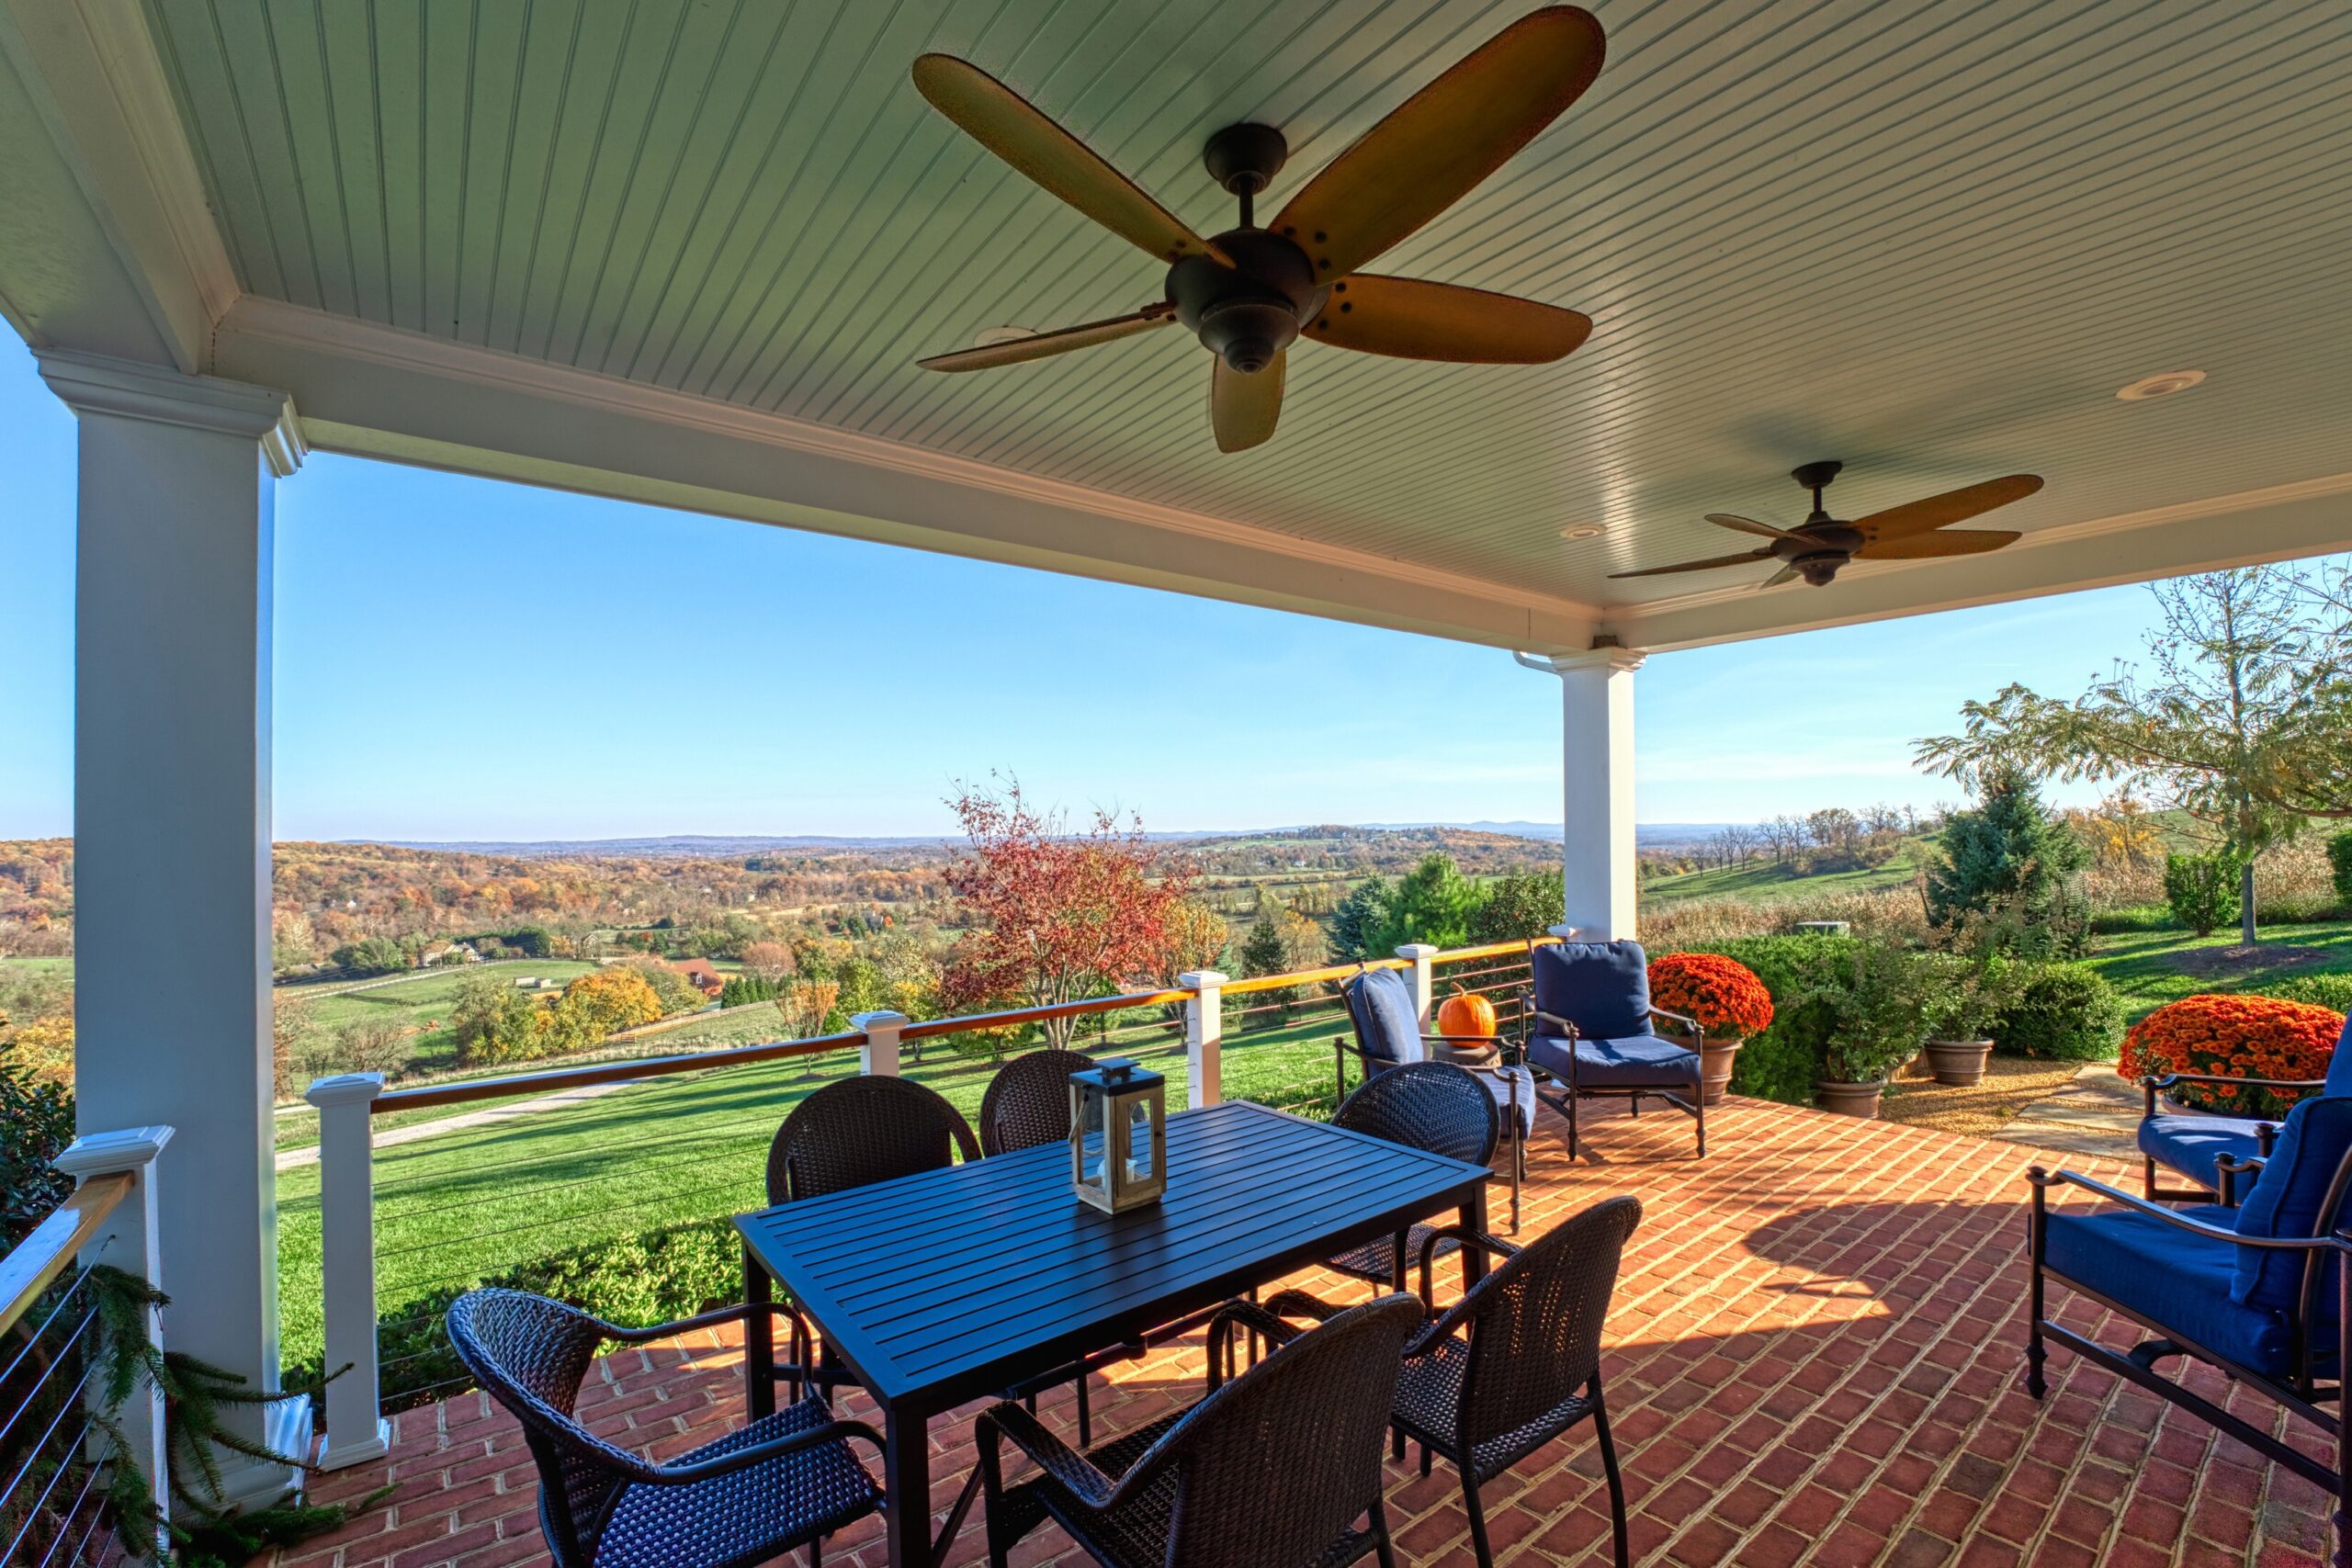 Professional exterior photo of 17151 Brookdale Ln in Round Hill, VA - showing the large covered brick patio with views of the country valley